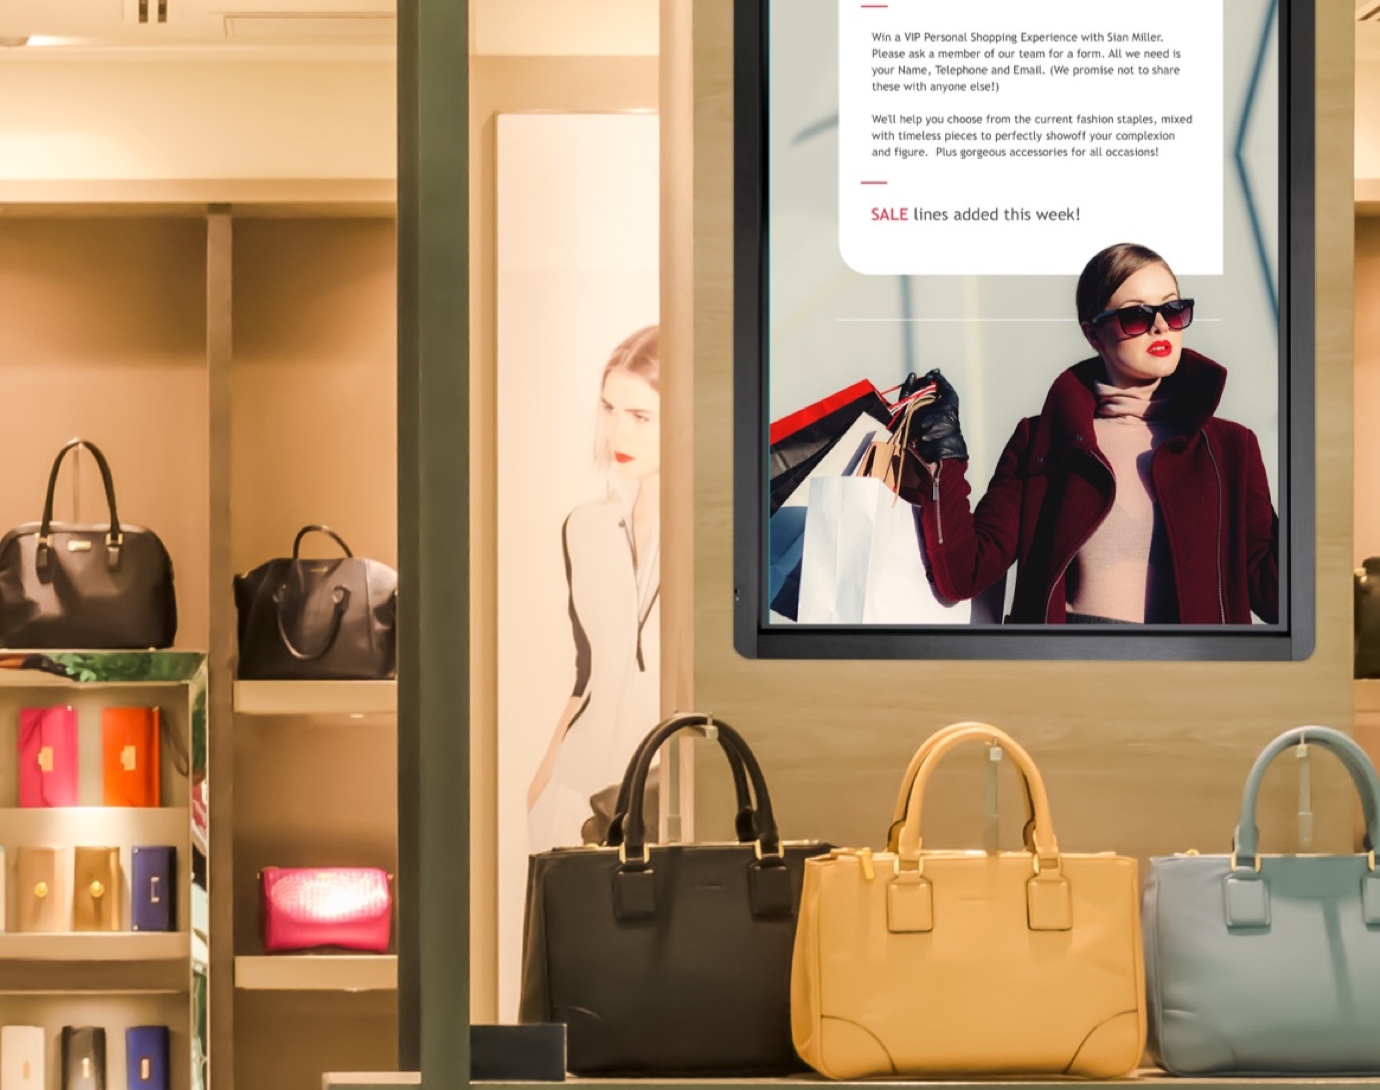 Retail Digital signage/15132 Retail_left and right image 01